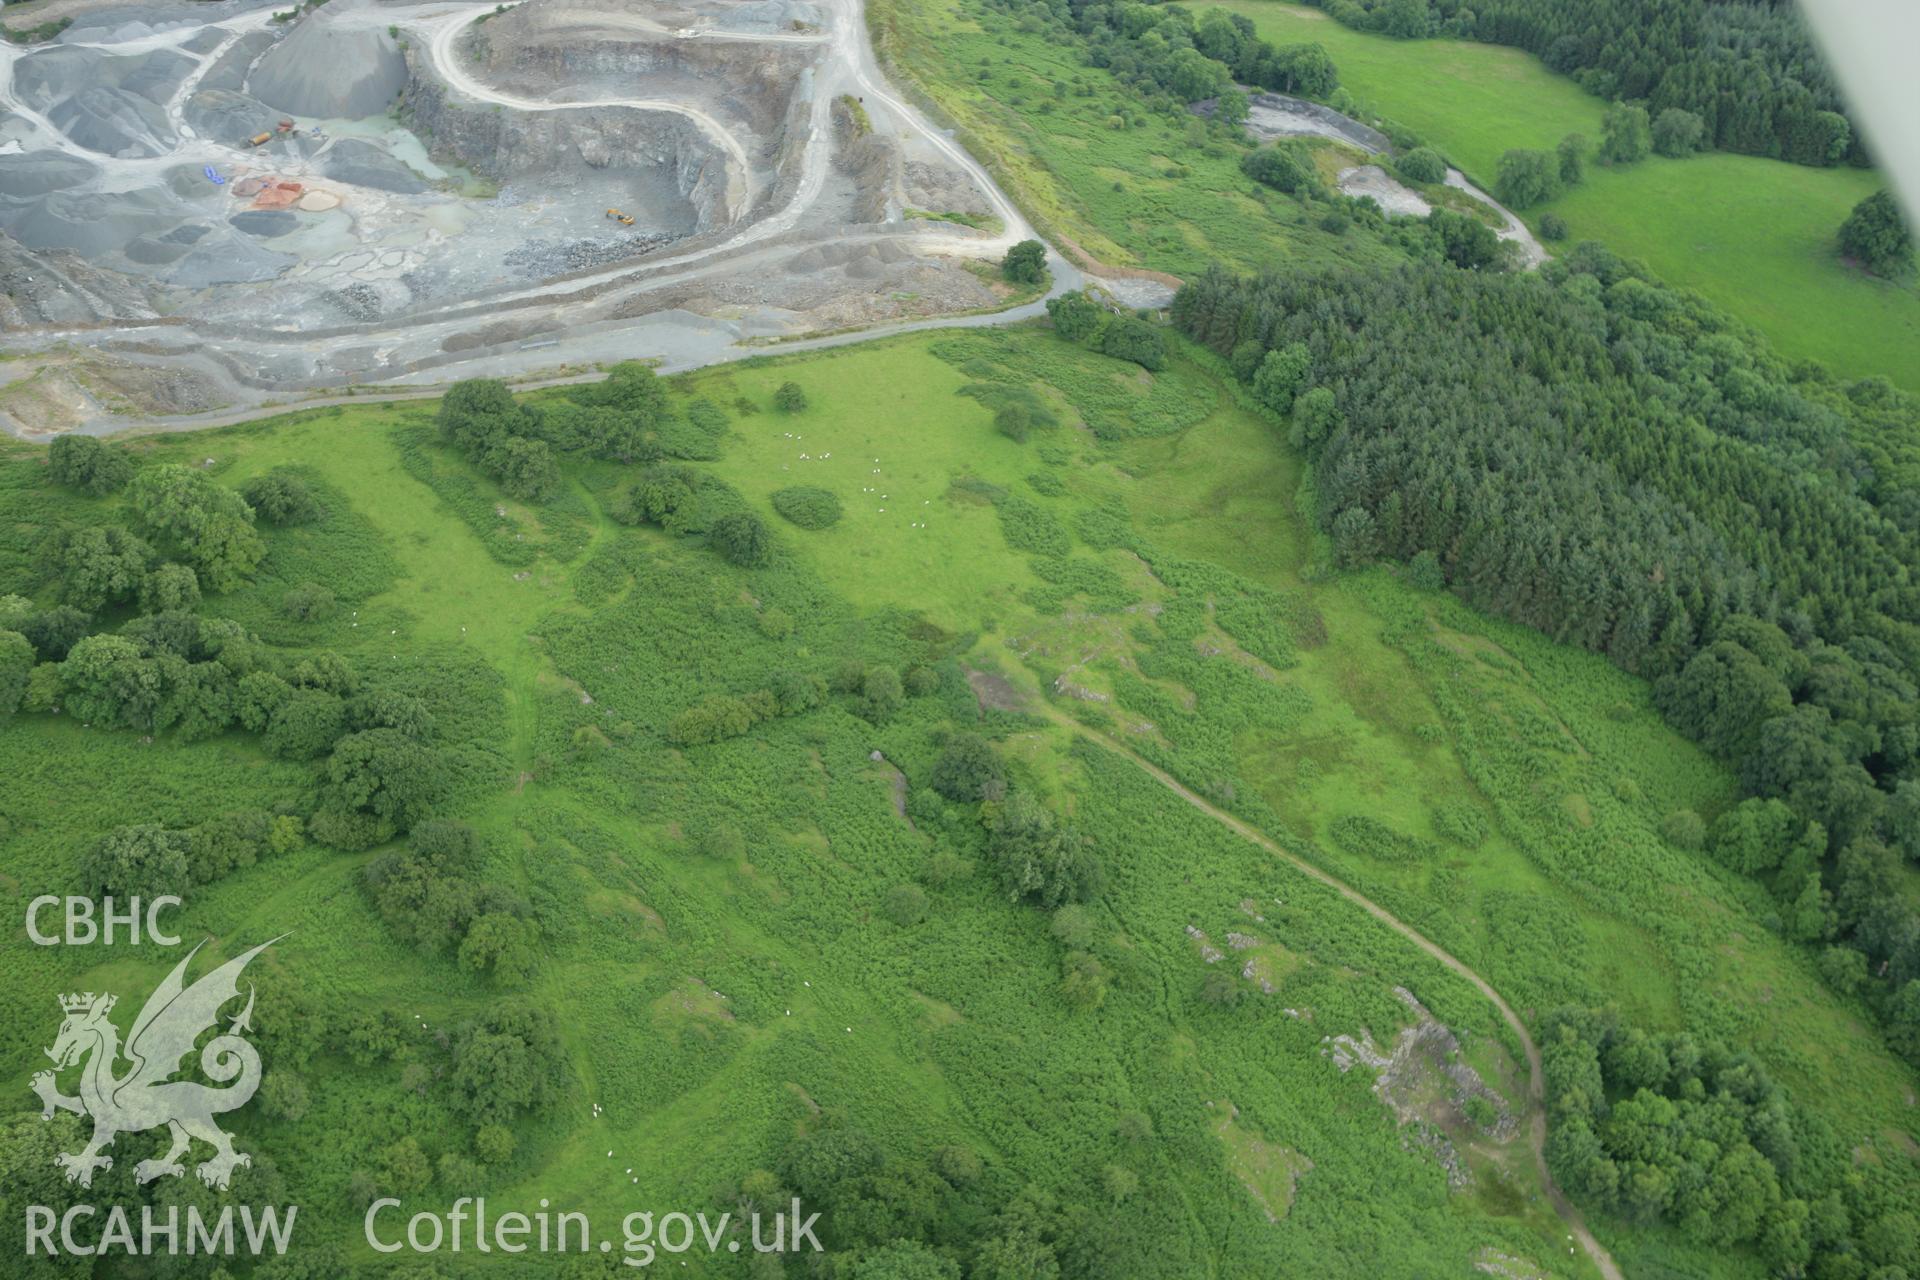 RCAHMW colour oblique aerial photograph of Llanwedd Stone Quarry and location of cairns, Builth Wells. Taken on 09 July 2007 by Toby Driver